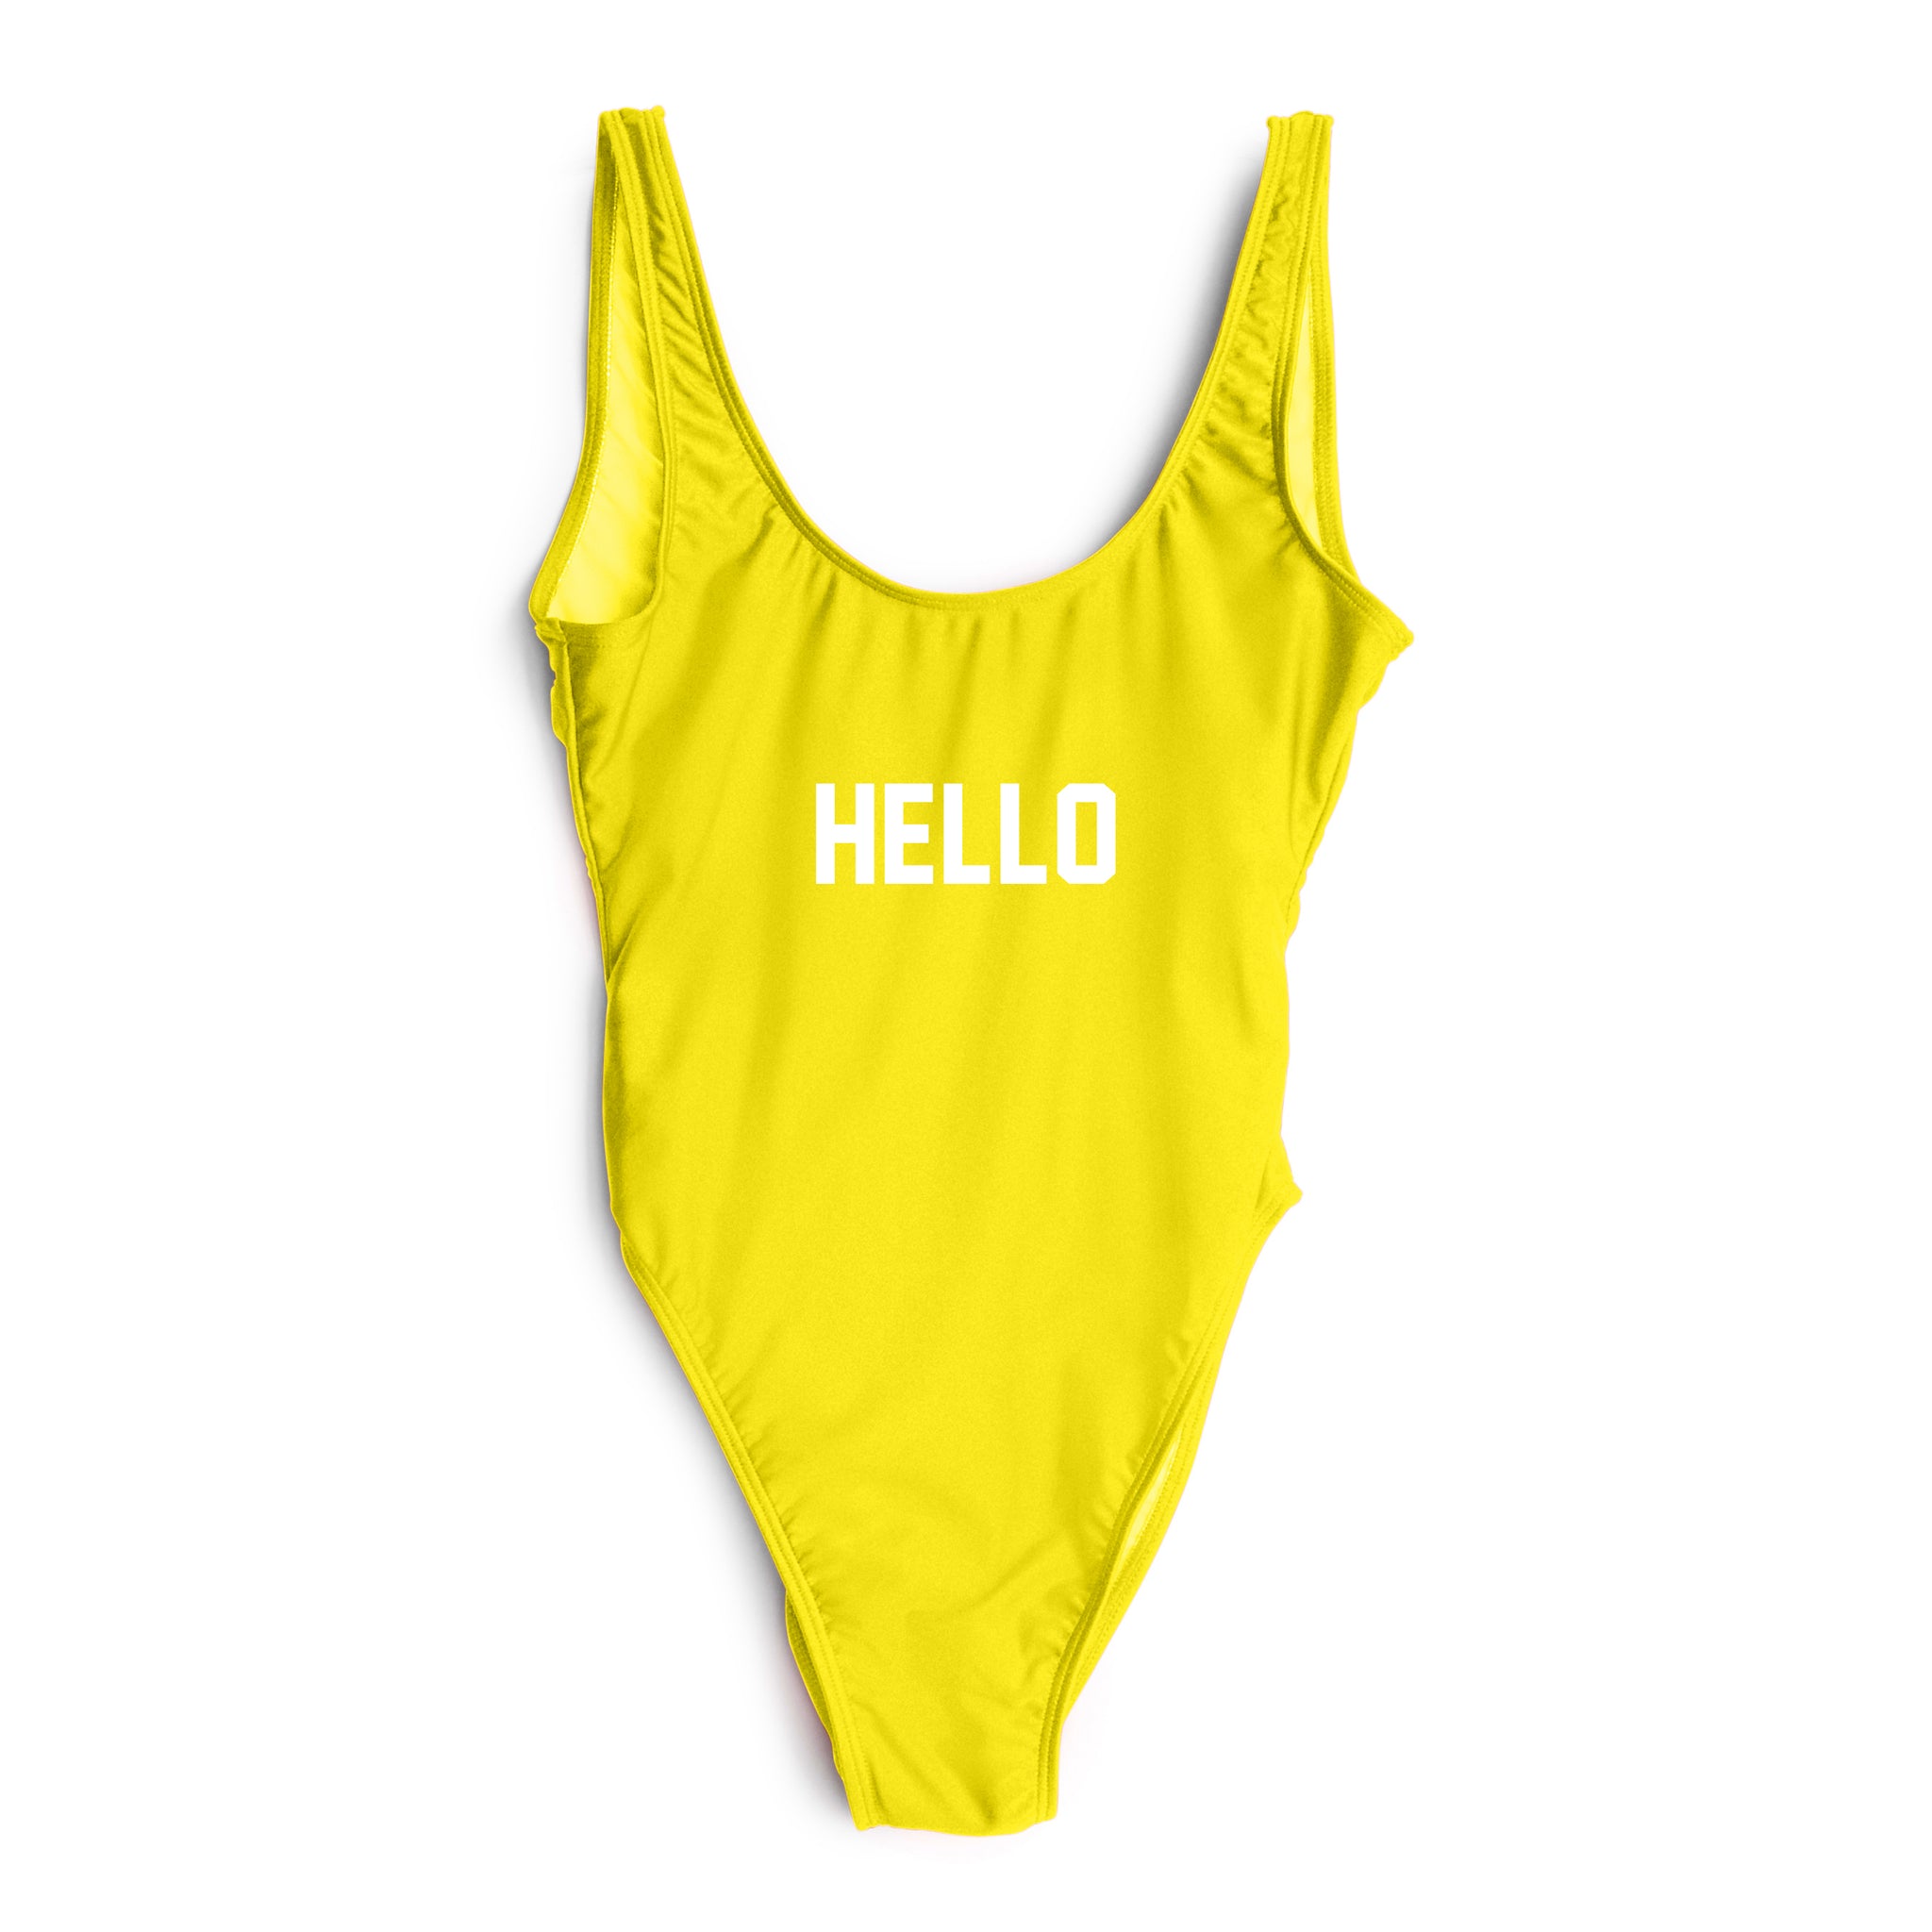 GOODBYE // BUTT PRINT // HELLO PRINT ON FRONT [SWIMSUIT]